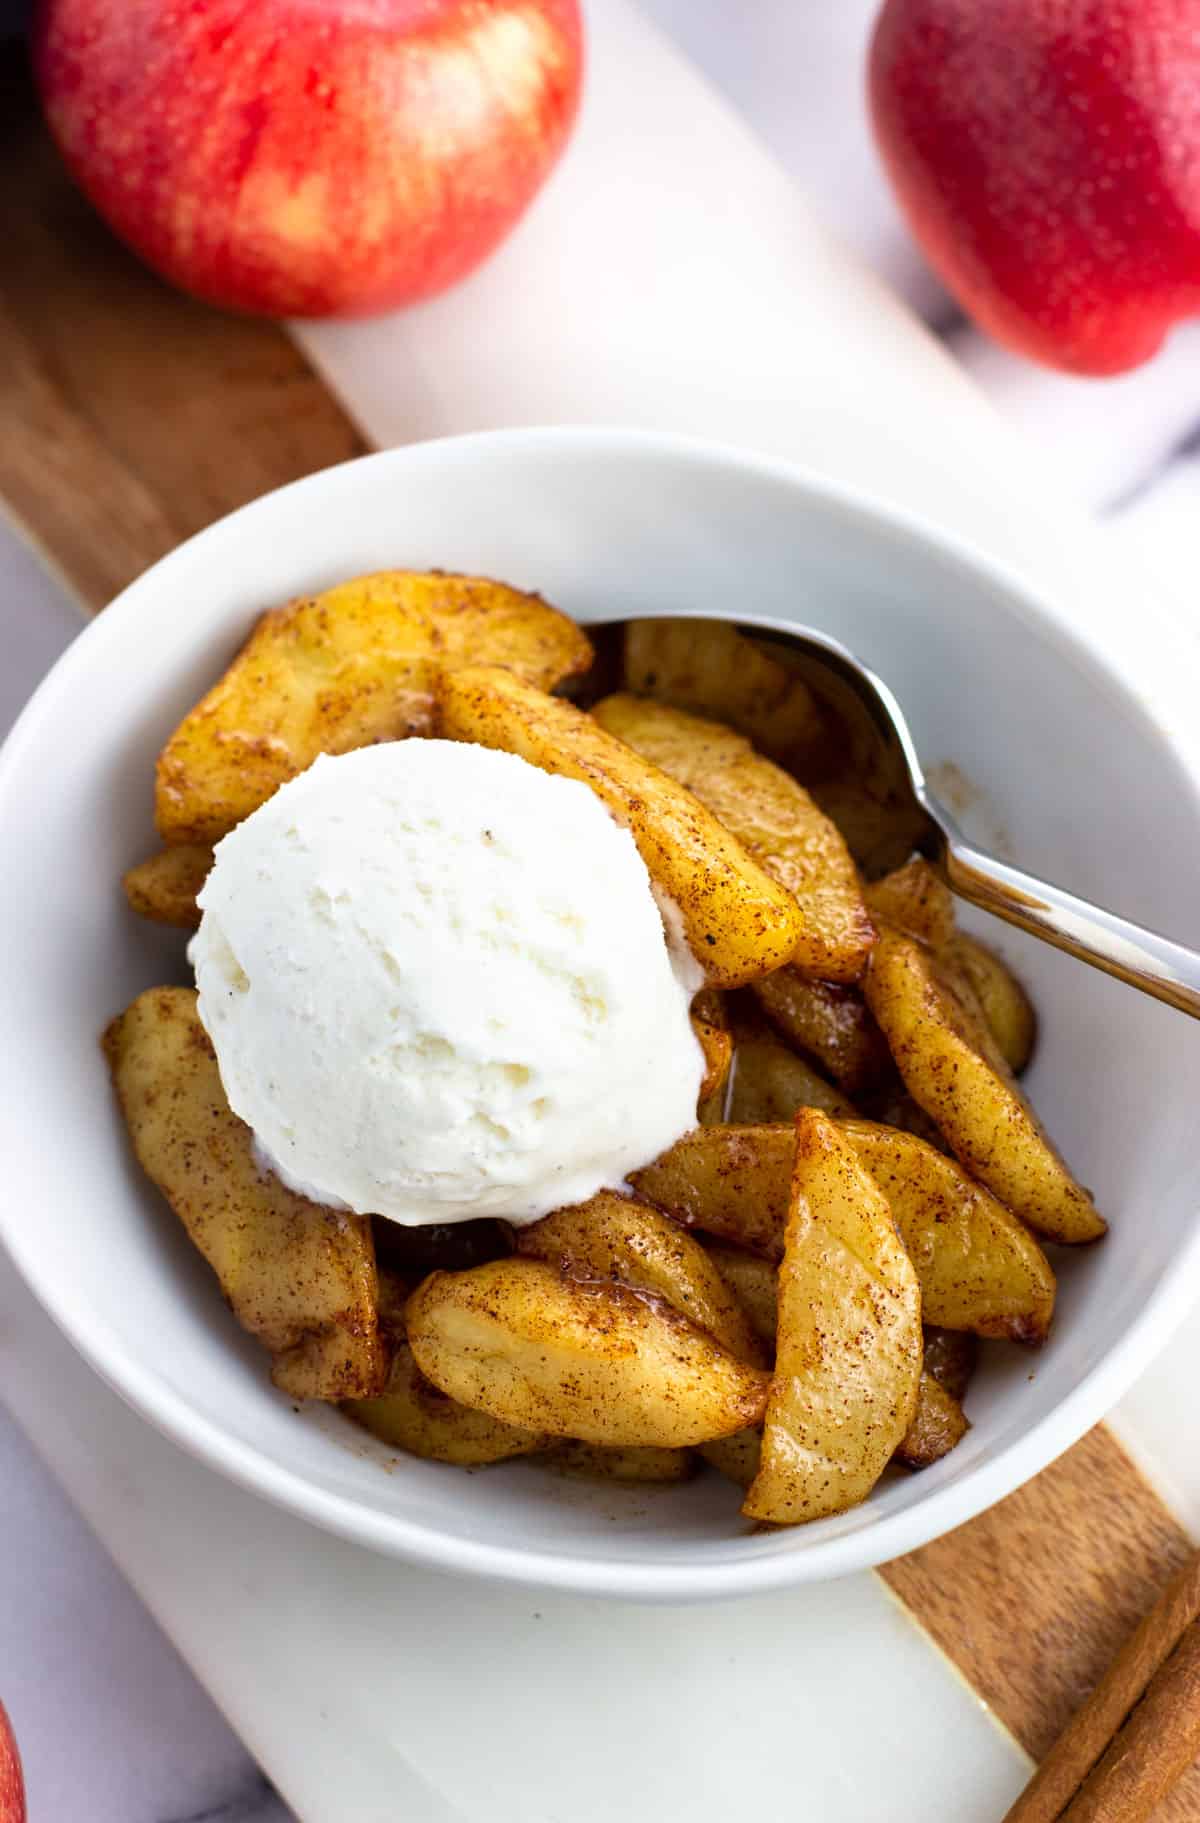 A serving of air fried apples topped with a scoop of vanilla ice cream.